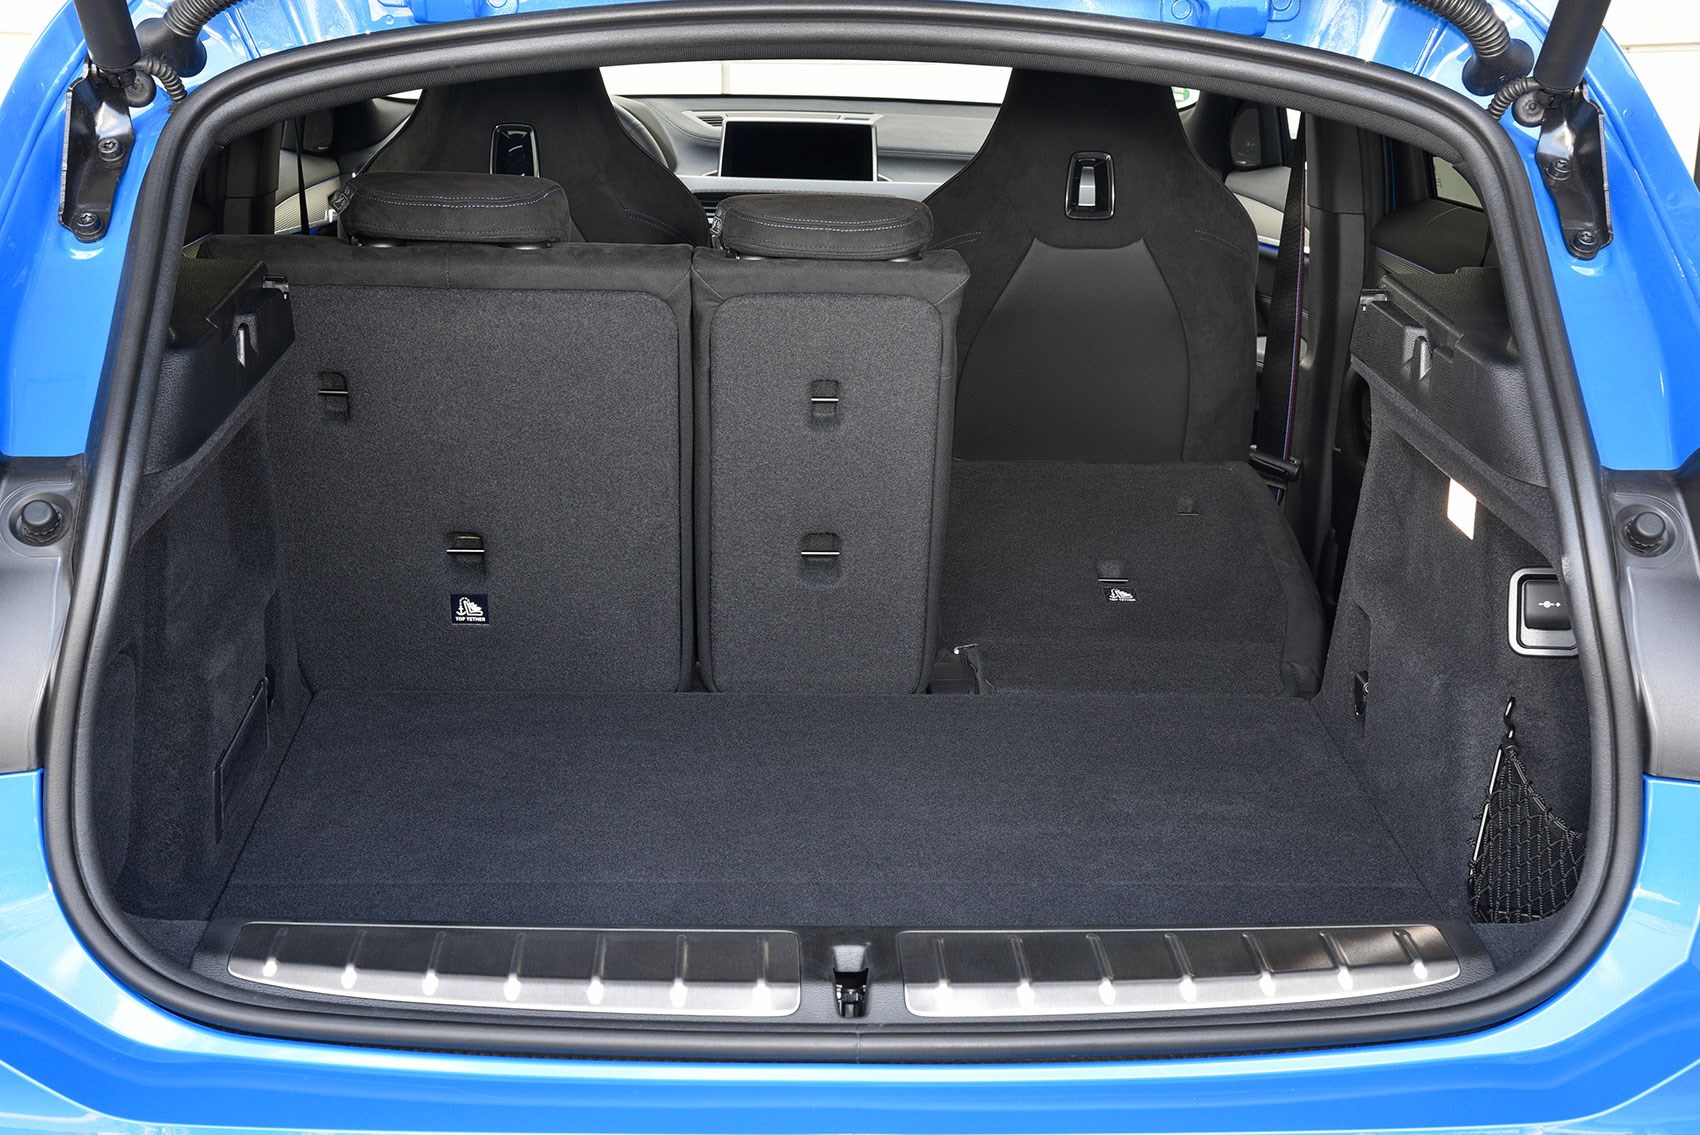 BMW X2 boot space